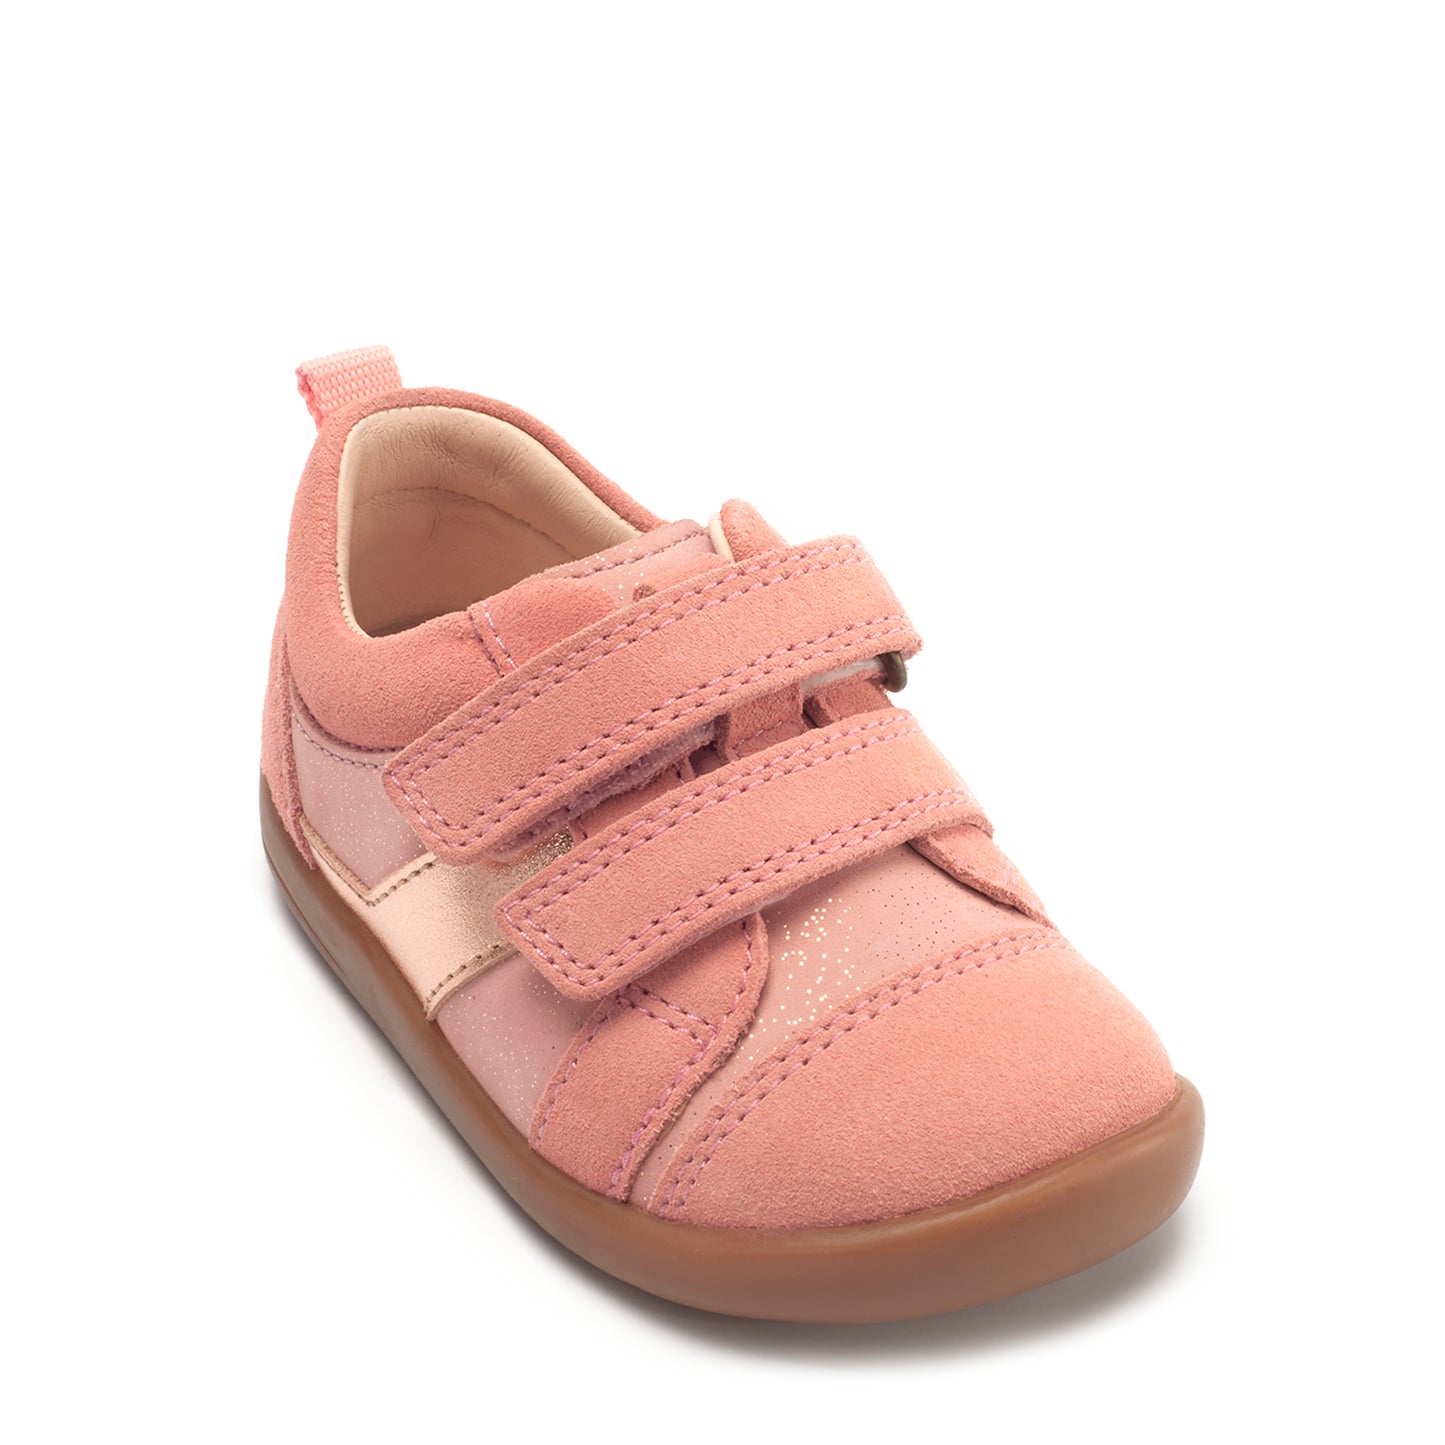 A girls casual shoe by Start Rite, style Maze, in pink and gold with double velcro fastening. Angled view.